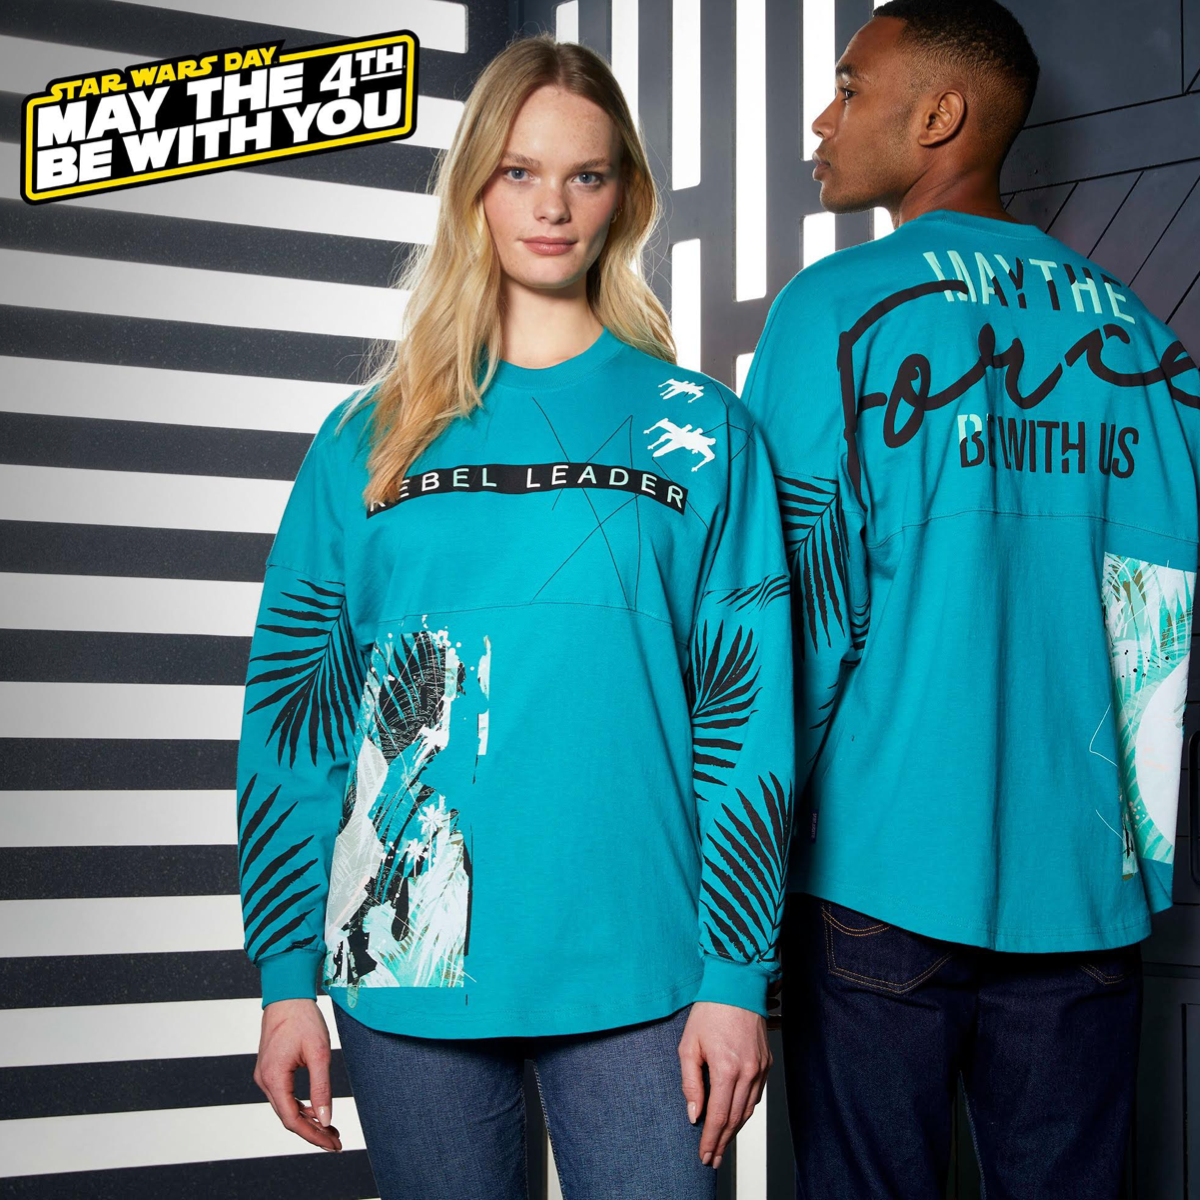 New 'May the Force Be With Us' Spirit Jersey Arrives at Disney's